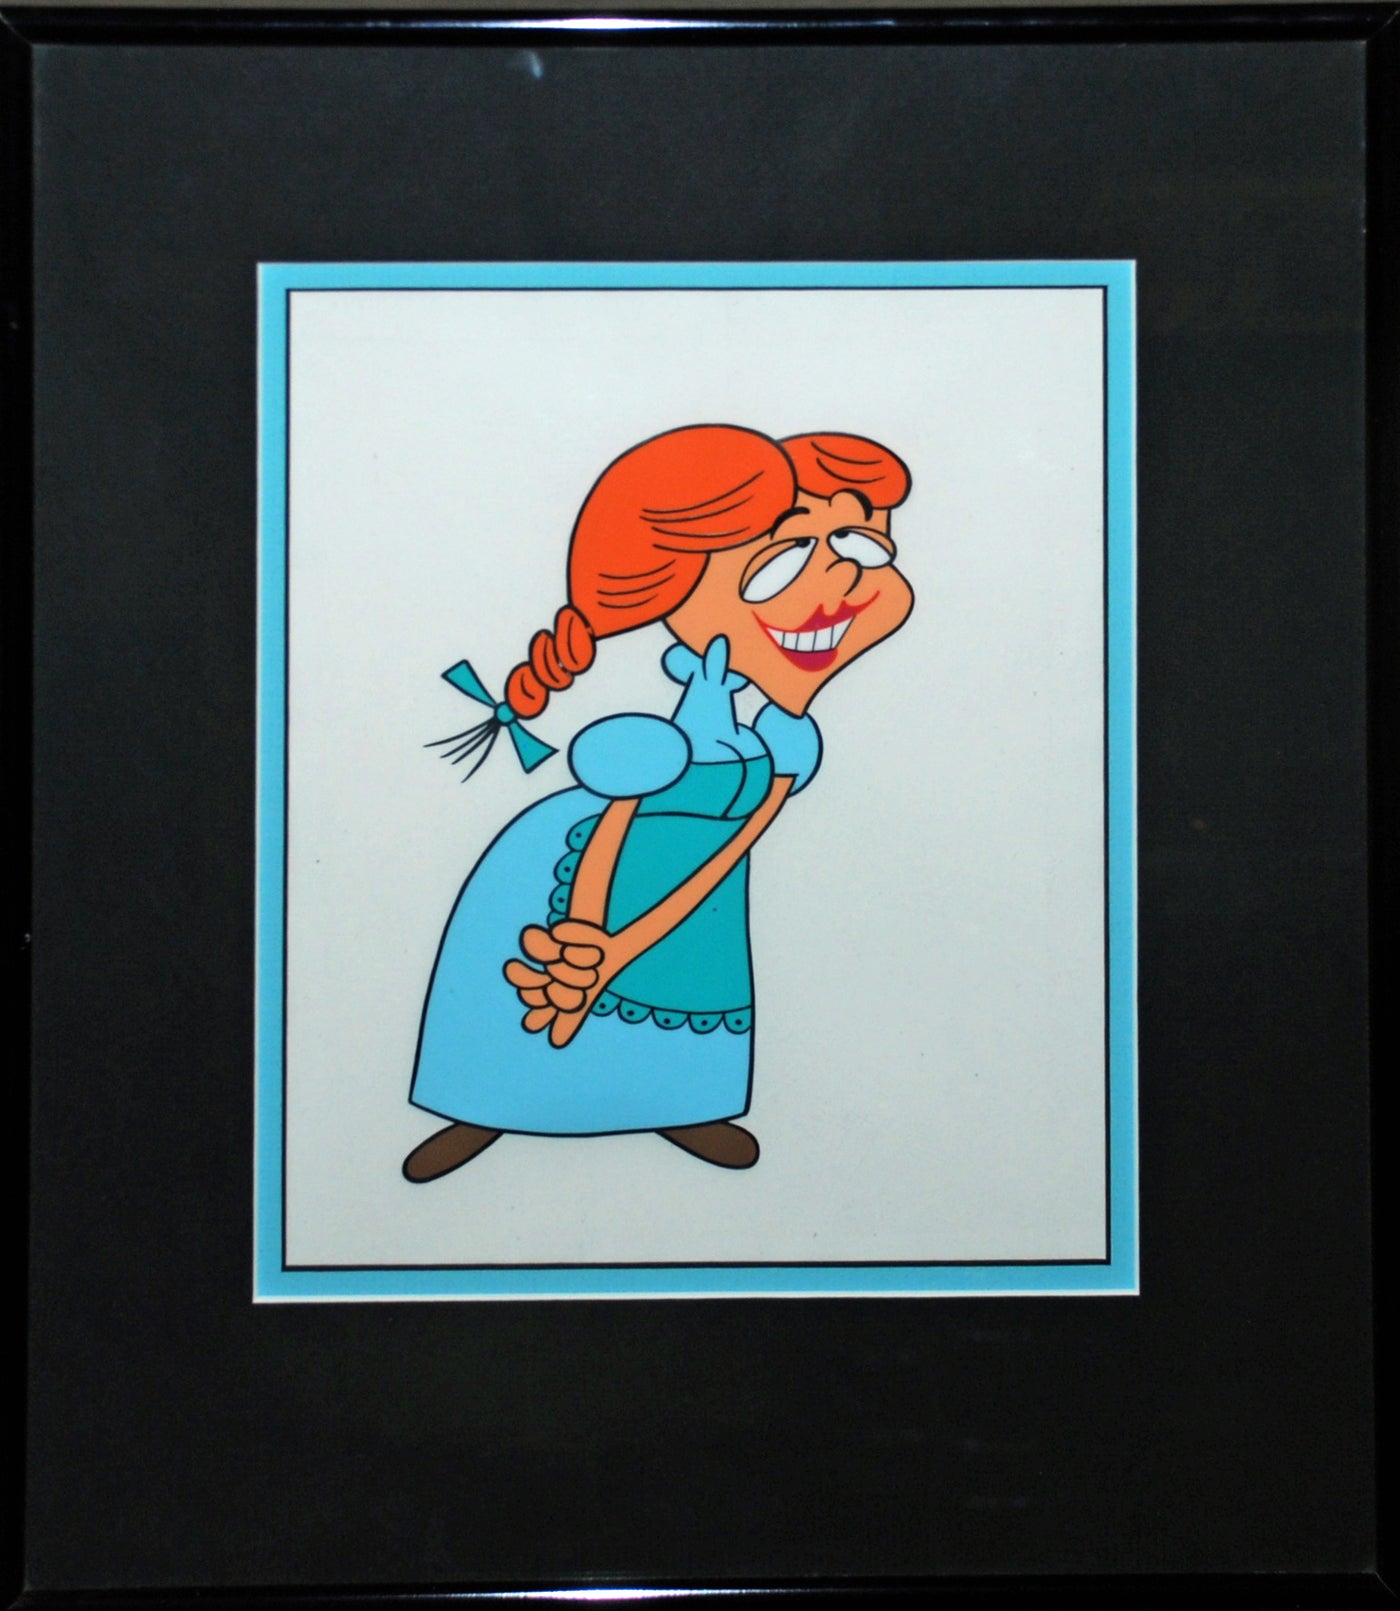 Original Jay Ward Productions Production Cel of Nell Fenwick from Dudley Do Right